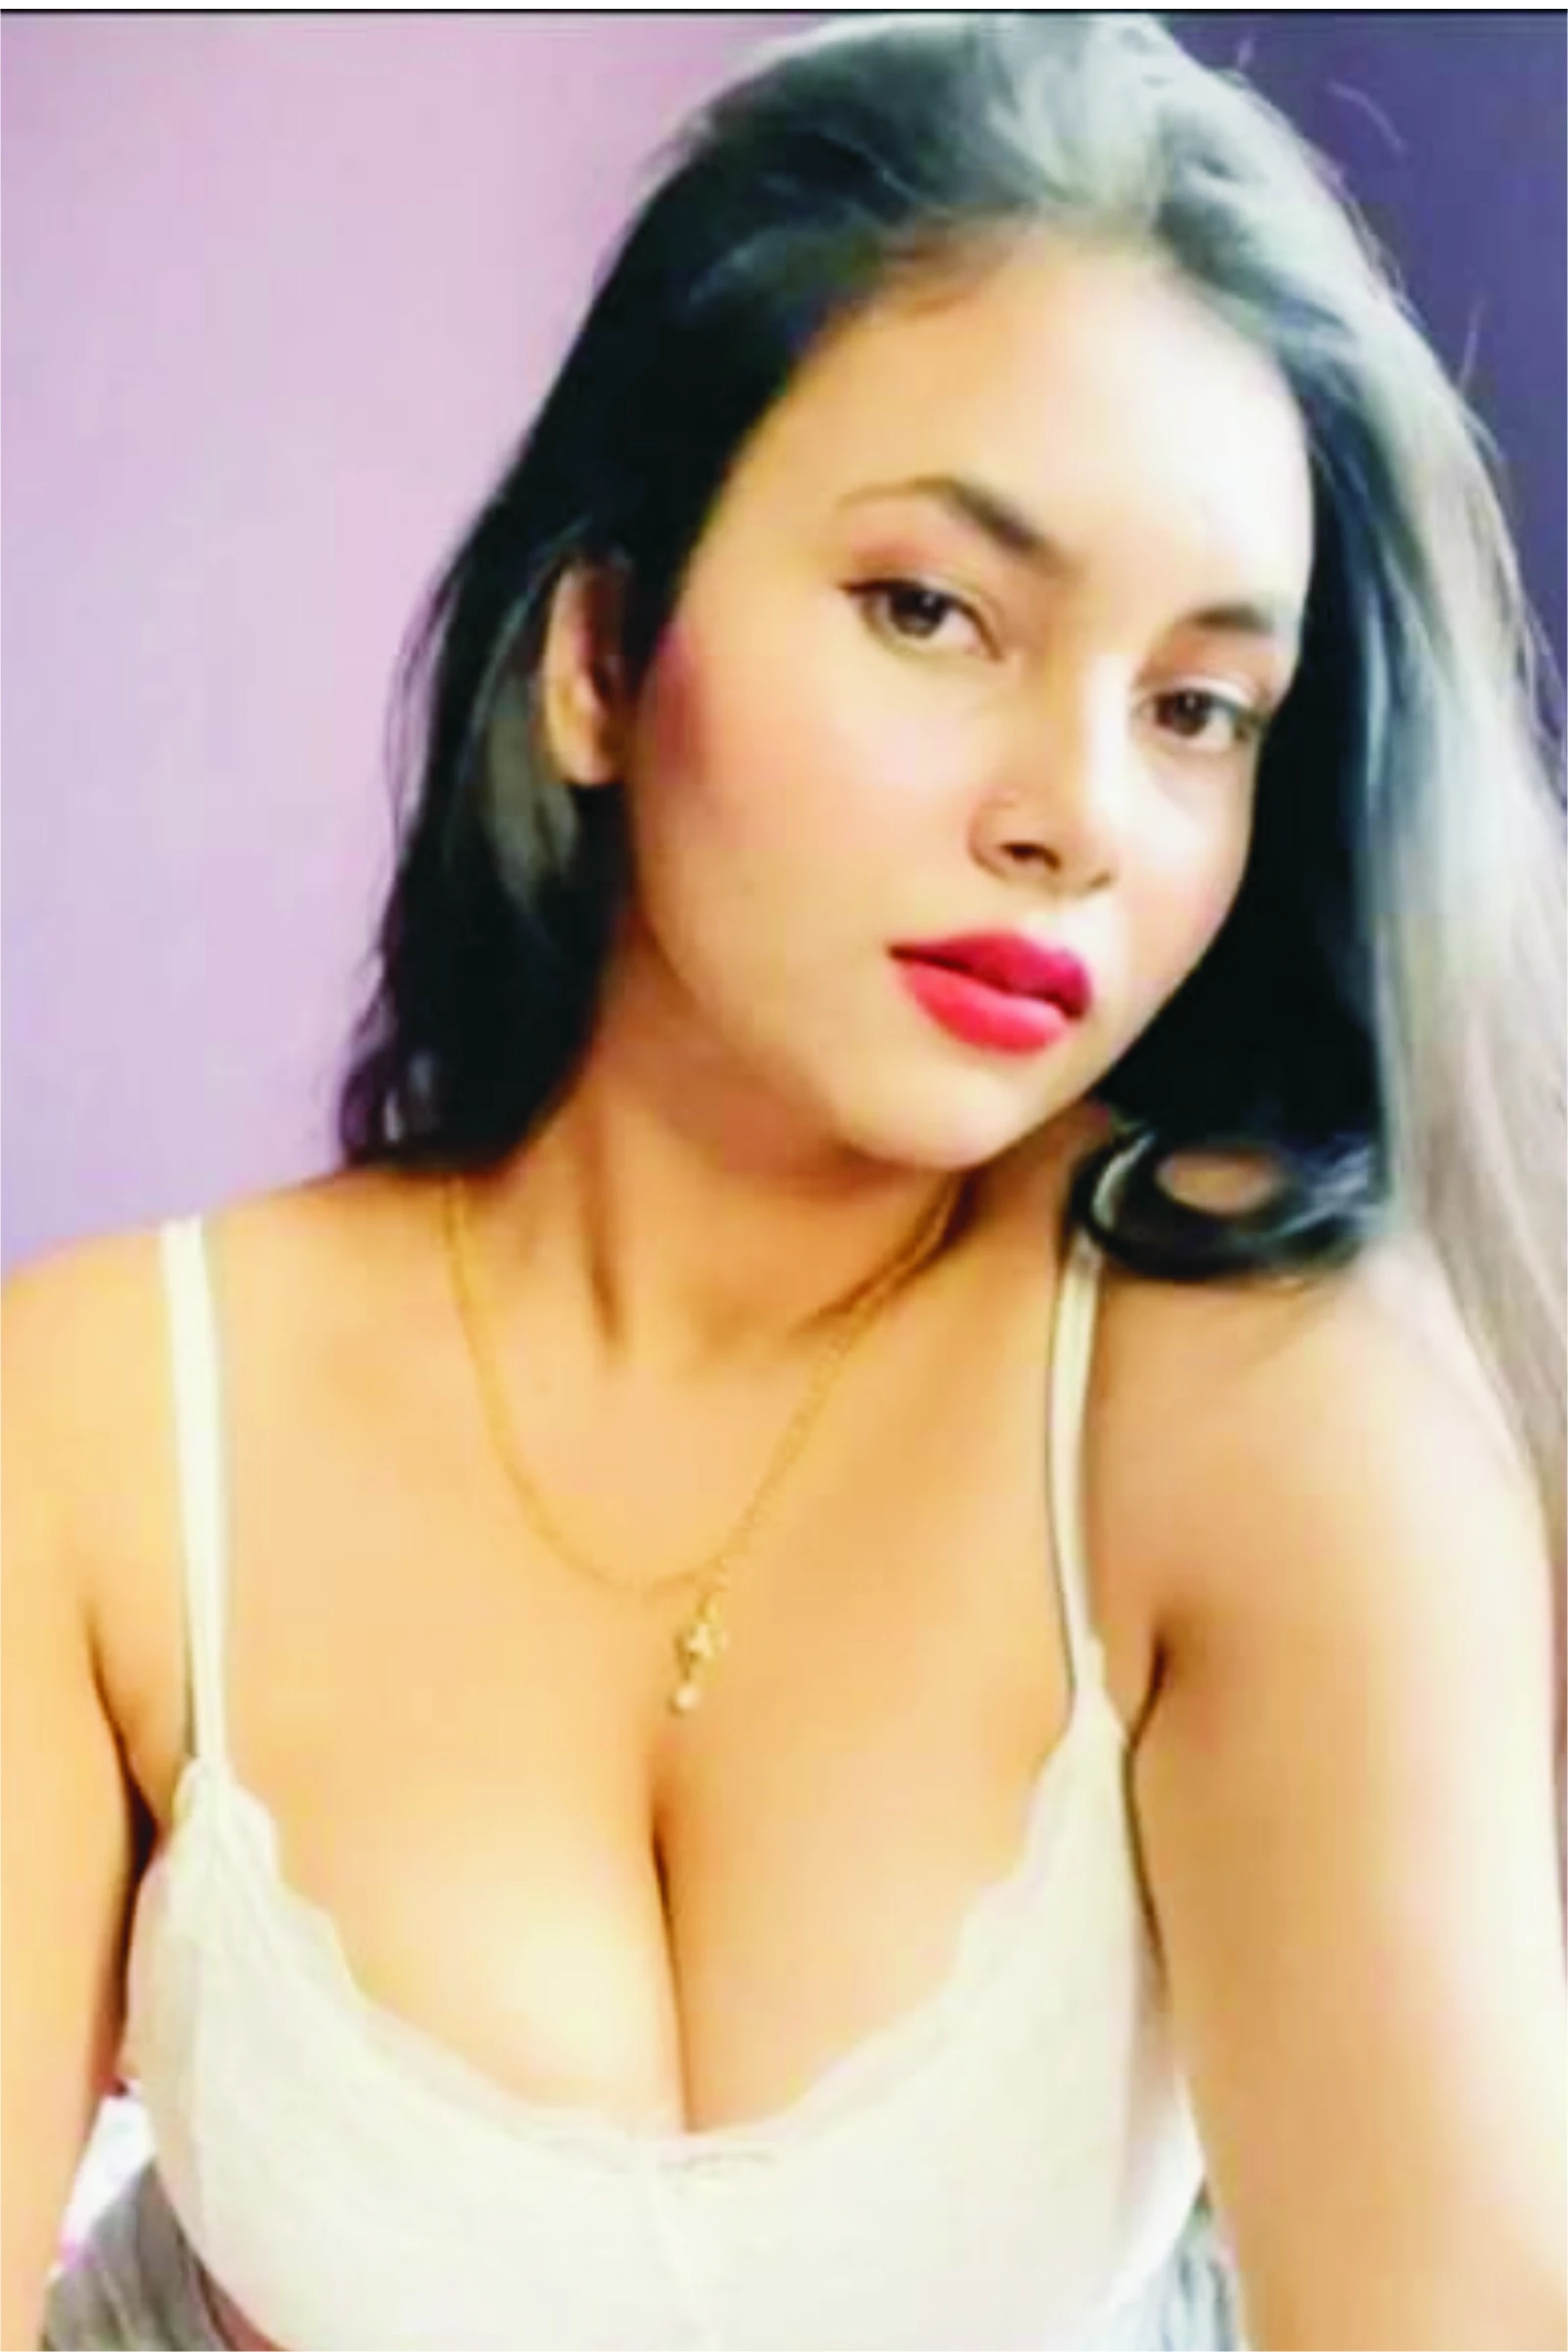 Kopar Khairane Call Girl Service At Very Low Rates In Hotel And Home